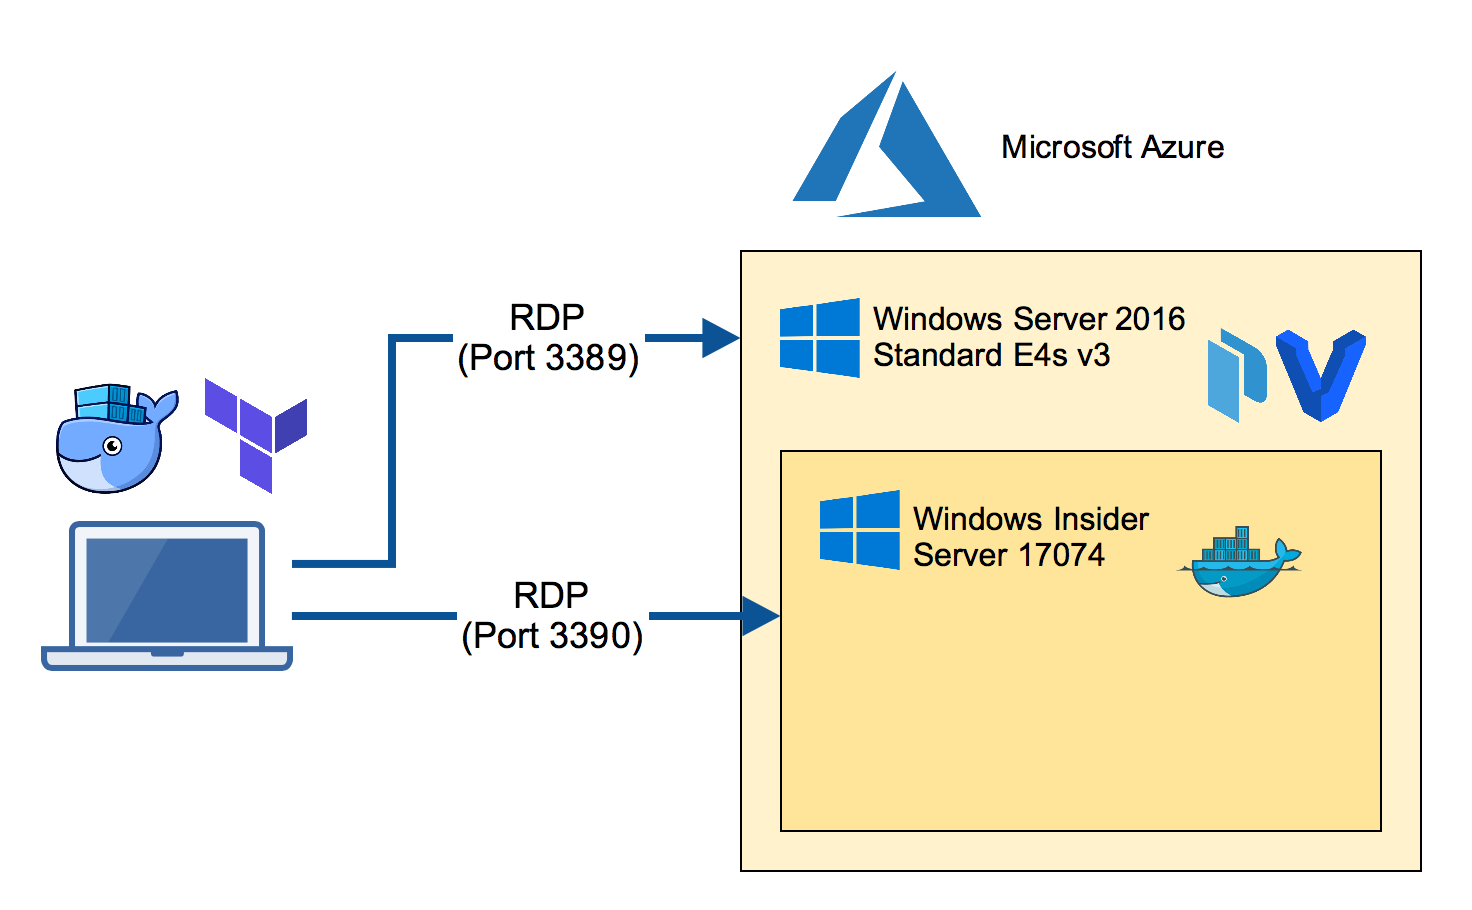 RDP to Azure and nested VM